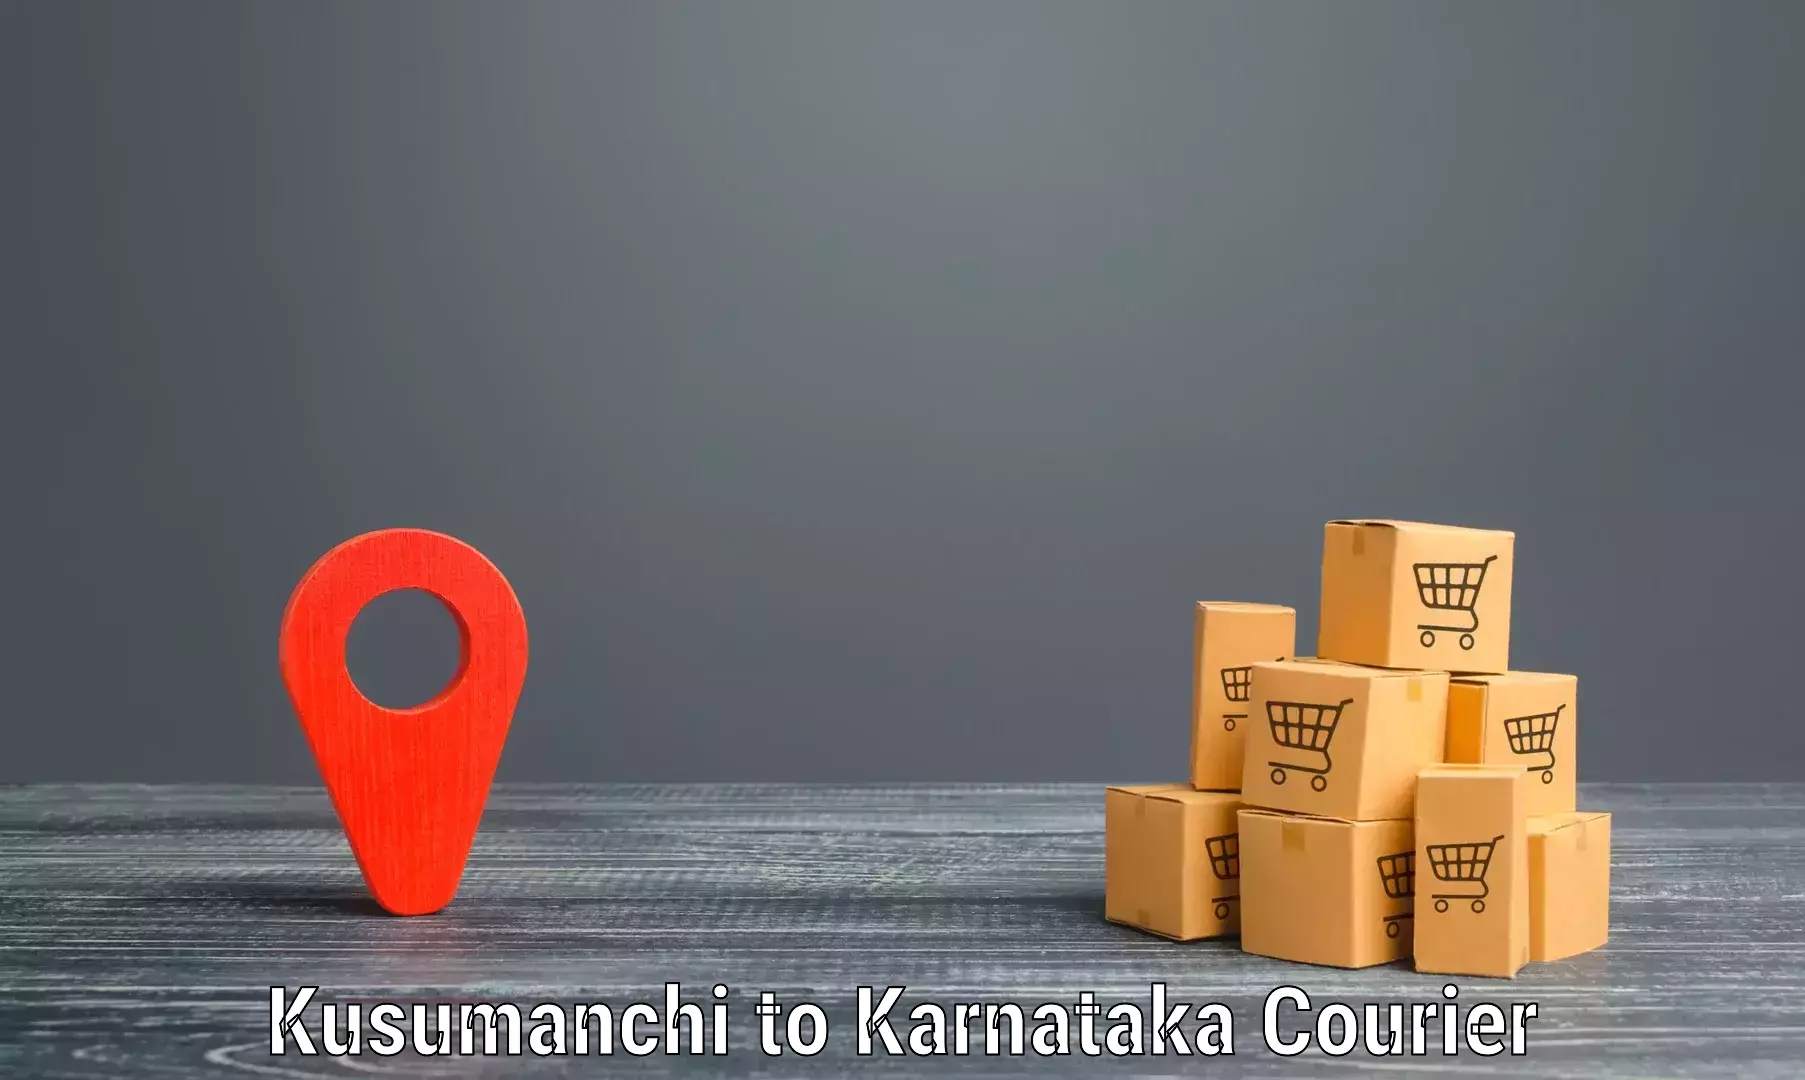 On-call courier service Kusumanchi to Eedu